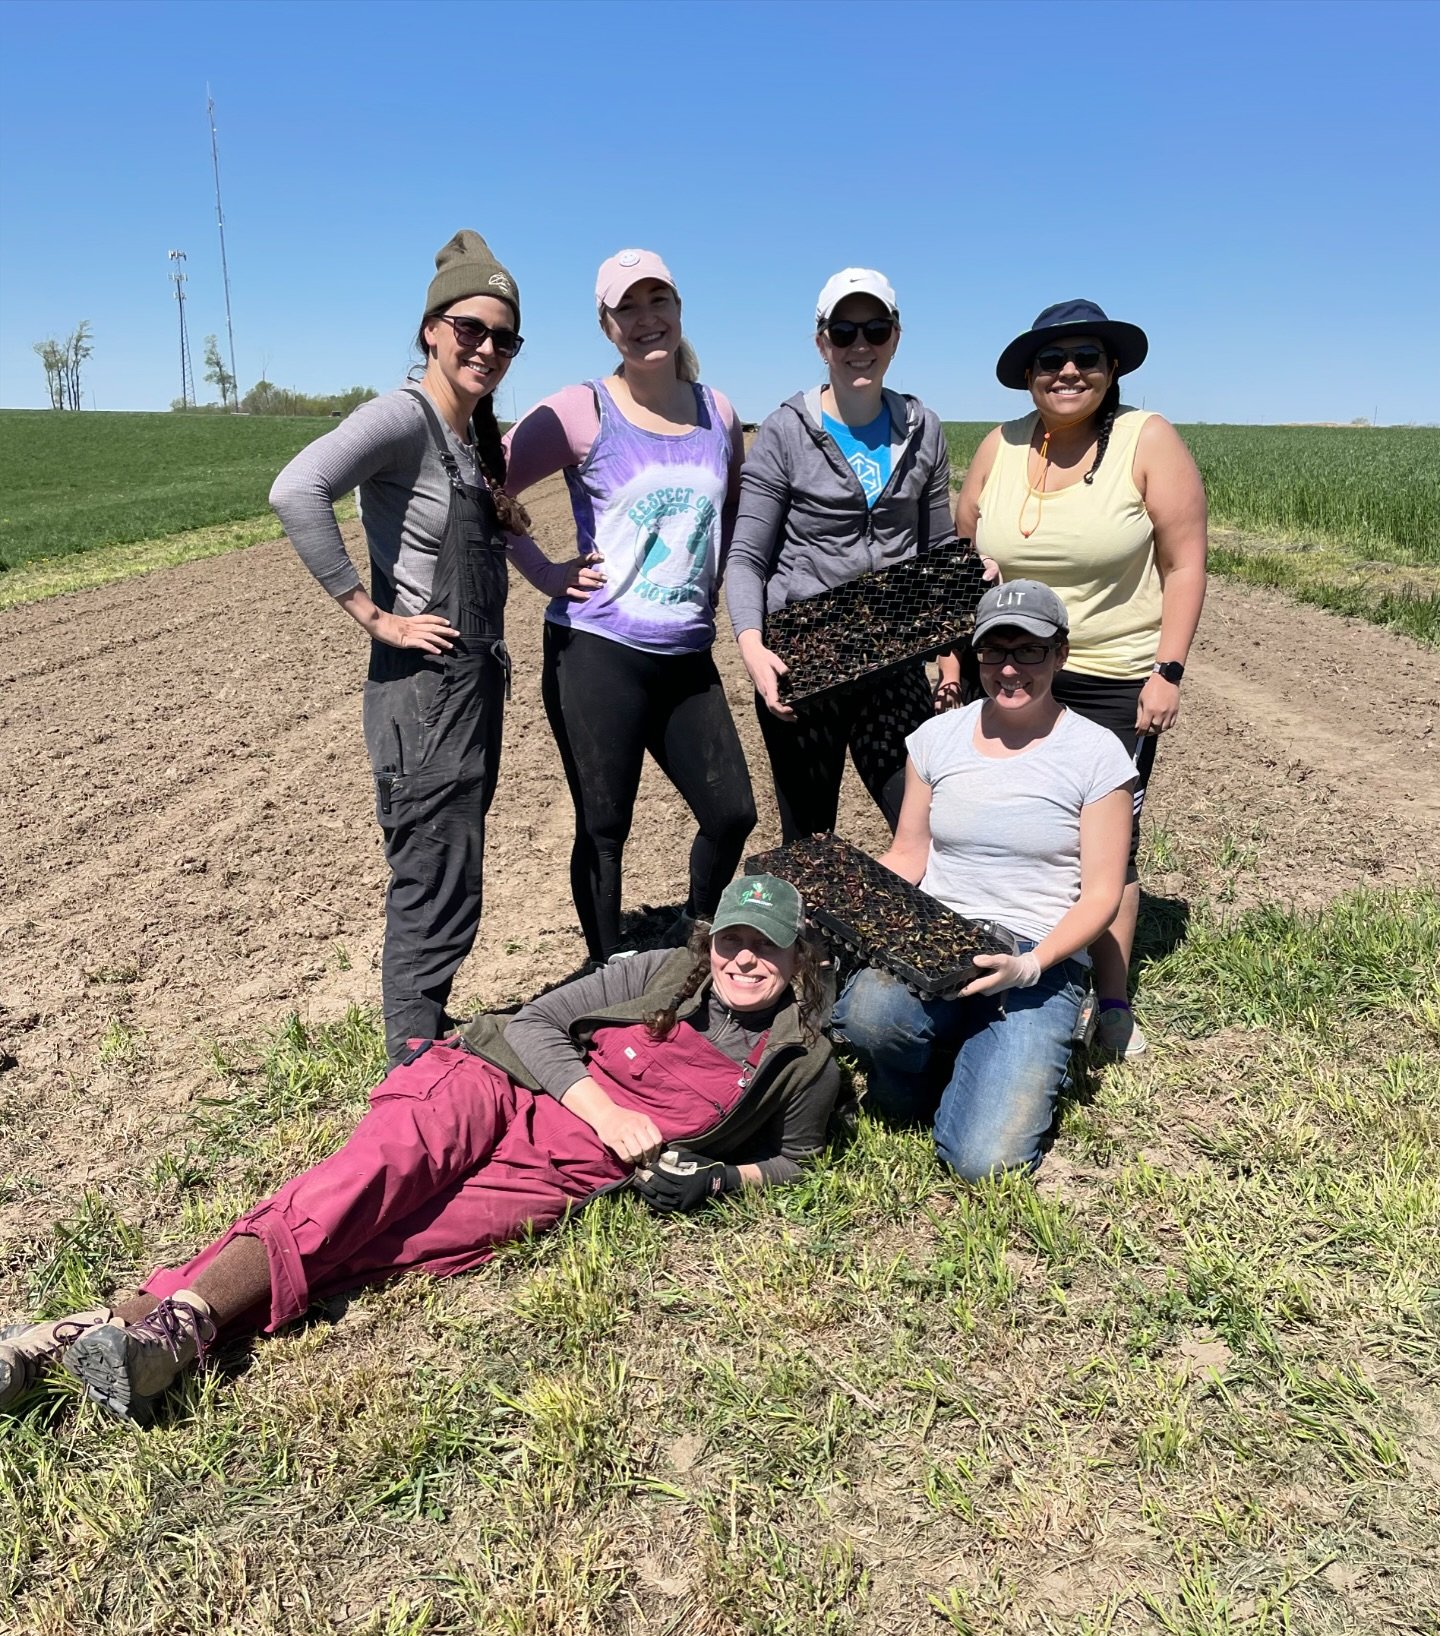 Big THANK YOU to the volunteer group from @c.h.robinson for helping us plant beets and lettuce today! 

We really appreciated having the extra help, gold stars all around!

#iowafarm #springplanting #iowafarmer #iowacity